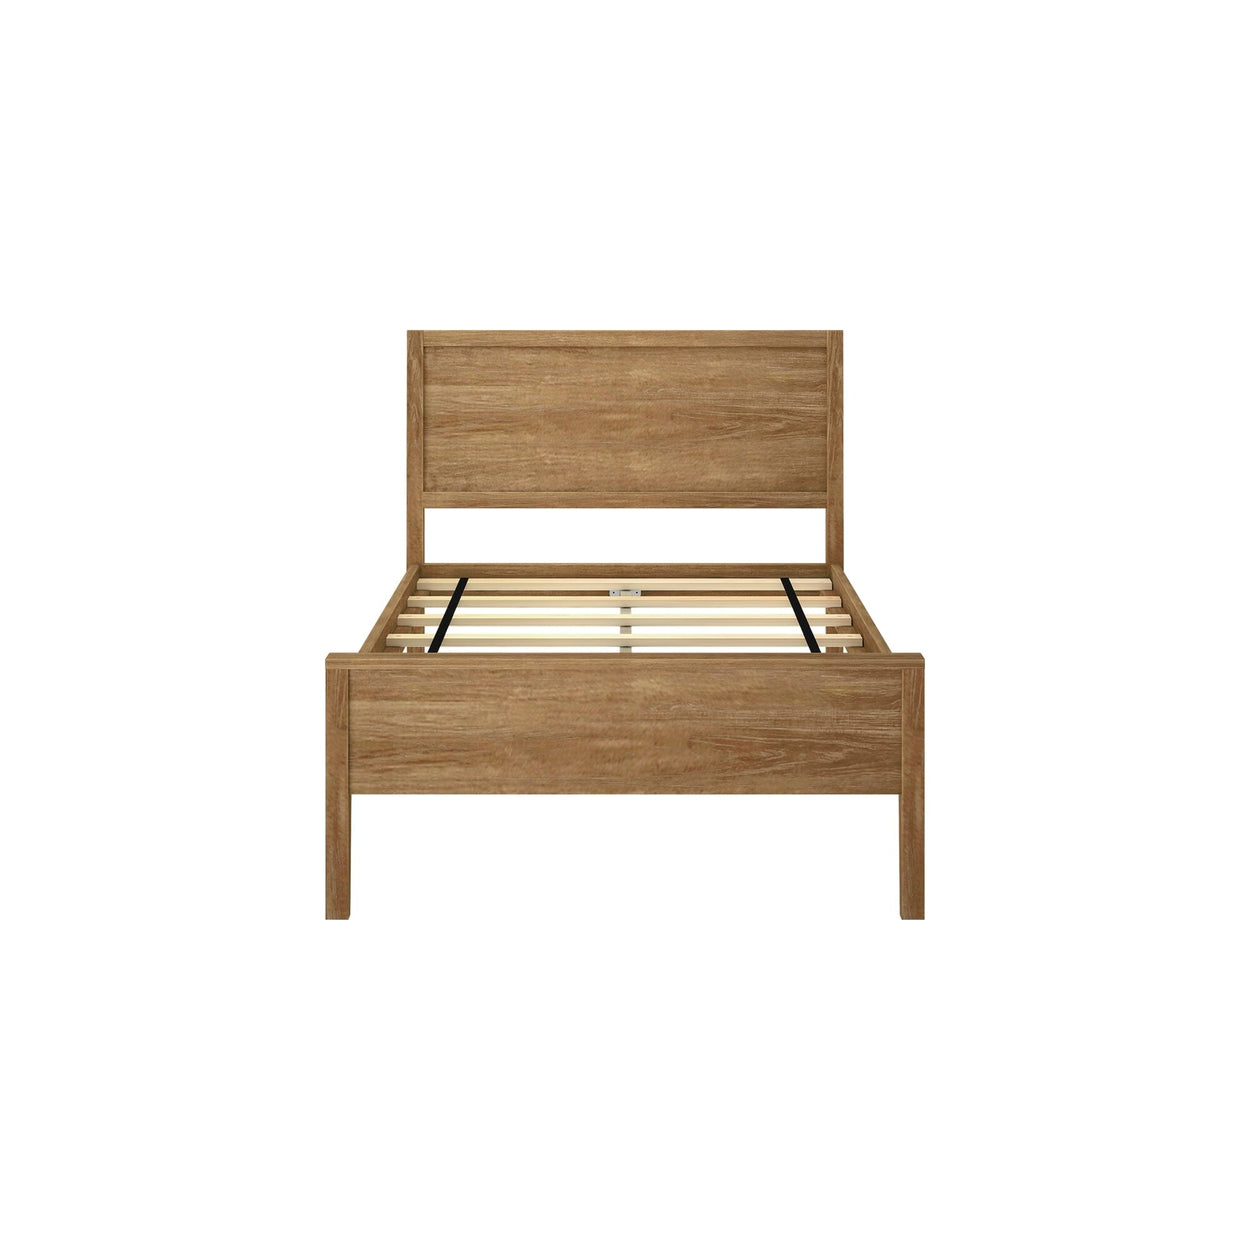 181100-007 : Kids Beds Classic Twin-Size Bed with Panel Headboard, Pecan